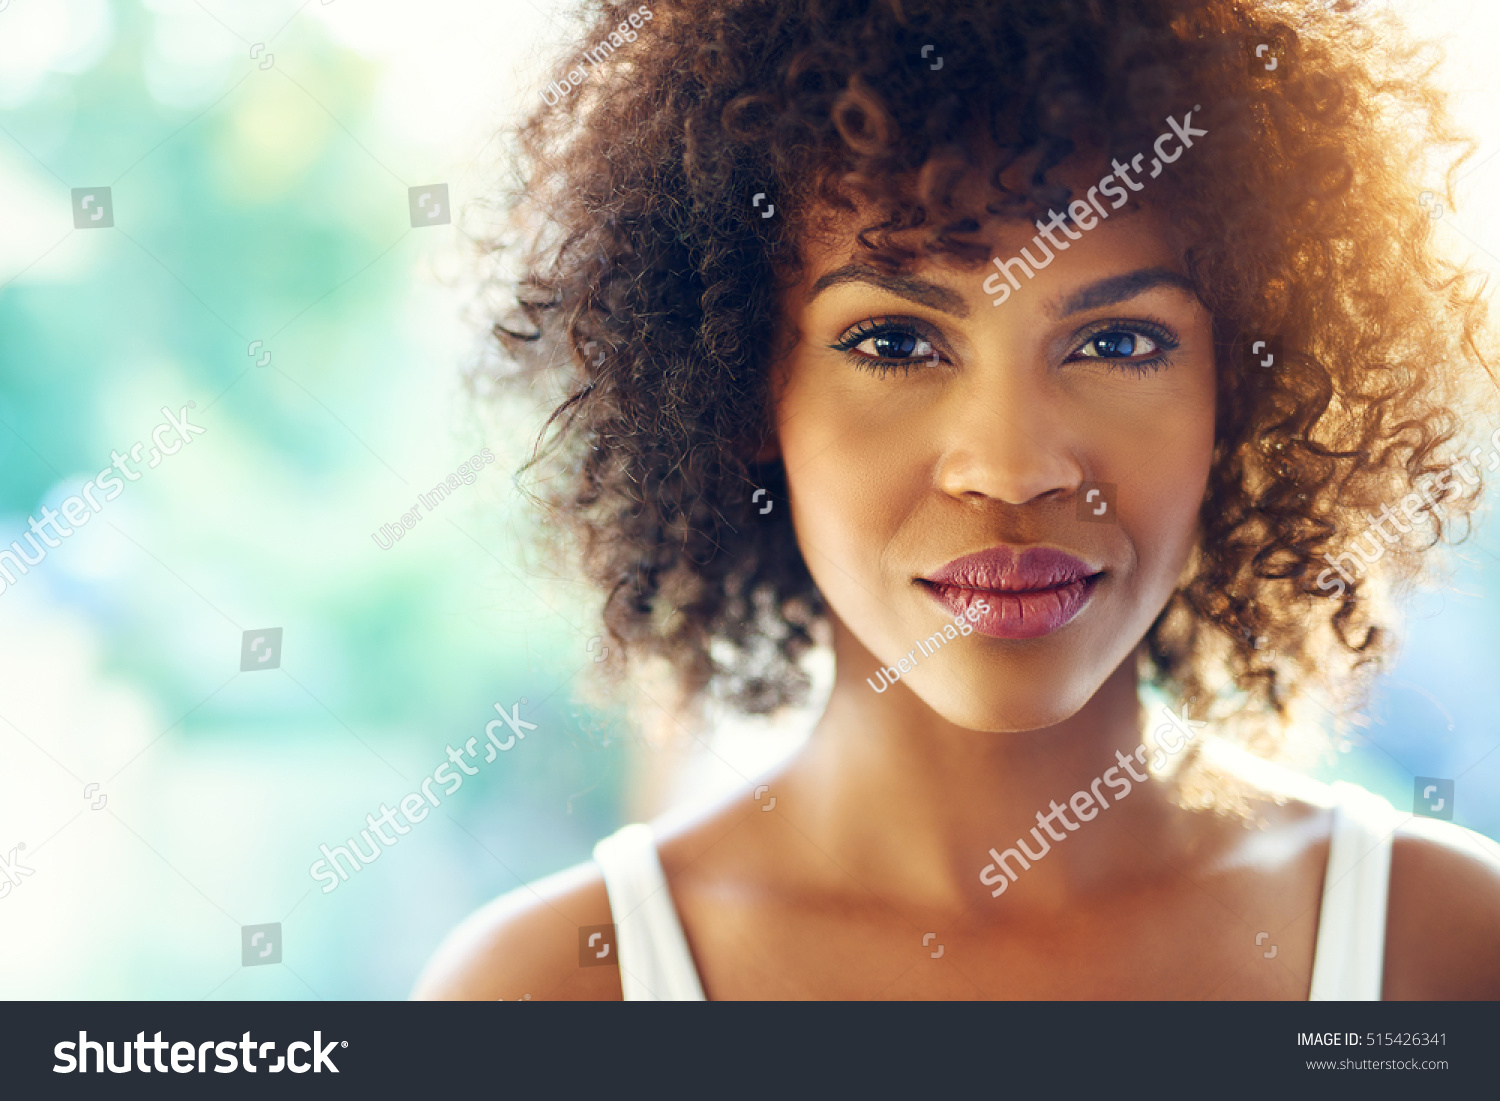 Close up portrait of beautiful curly girl looking at camera emotionless. Copyspace #515426341